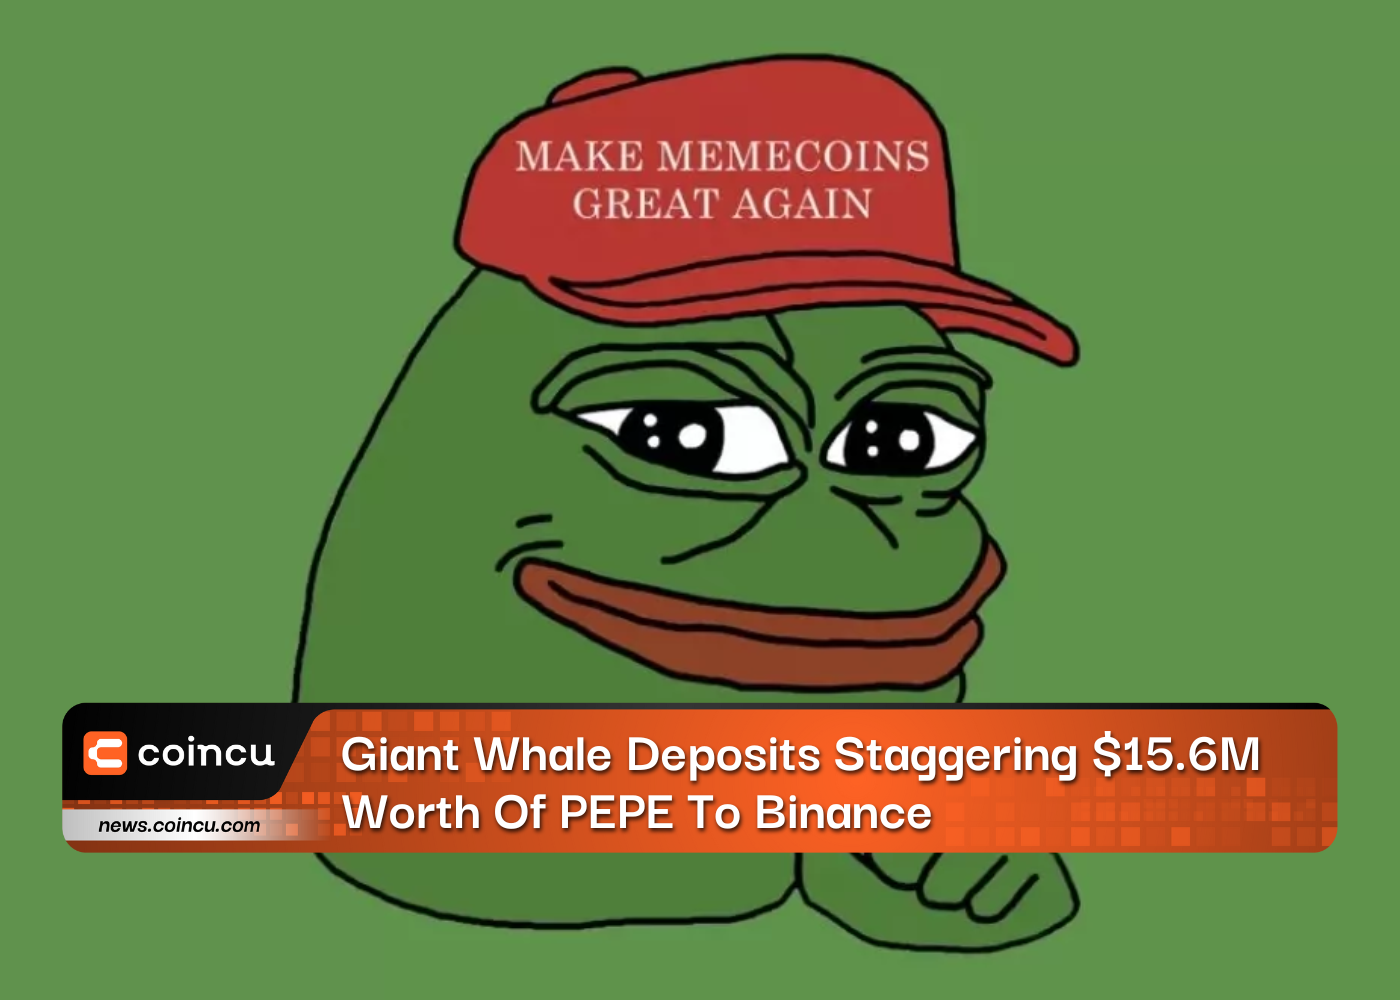 Giant Whale Deposits Staggering $15.6M Worth Of PEPE To Binance